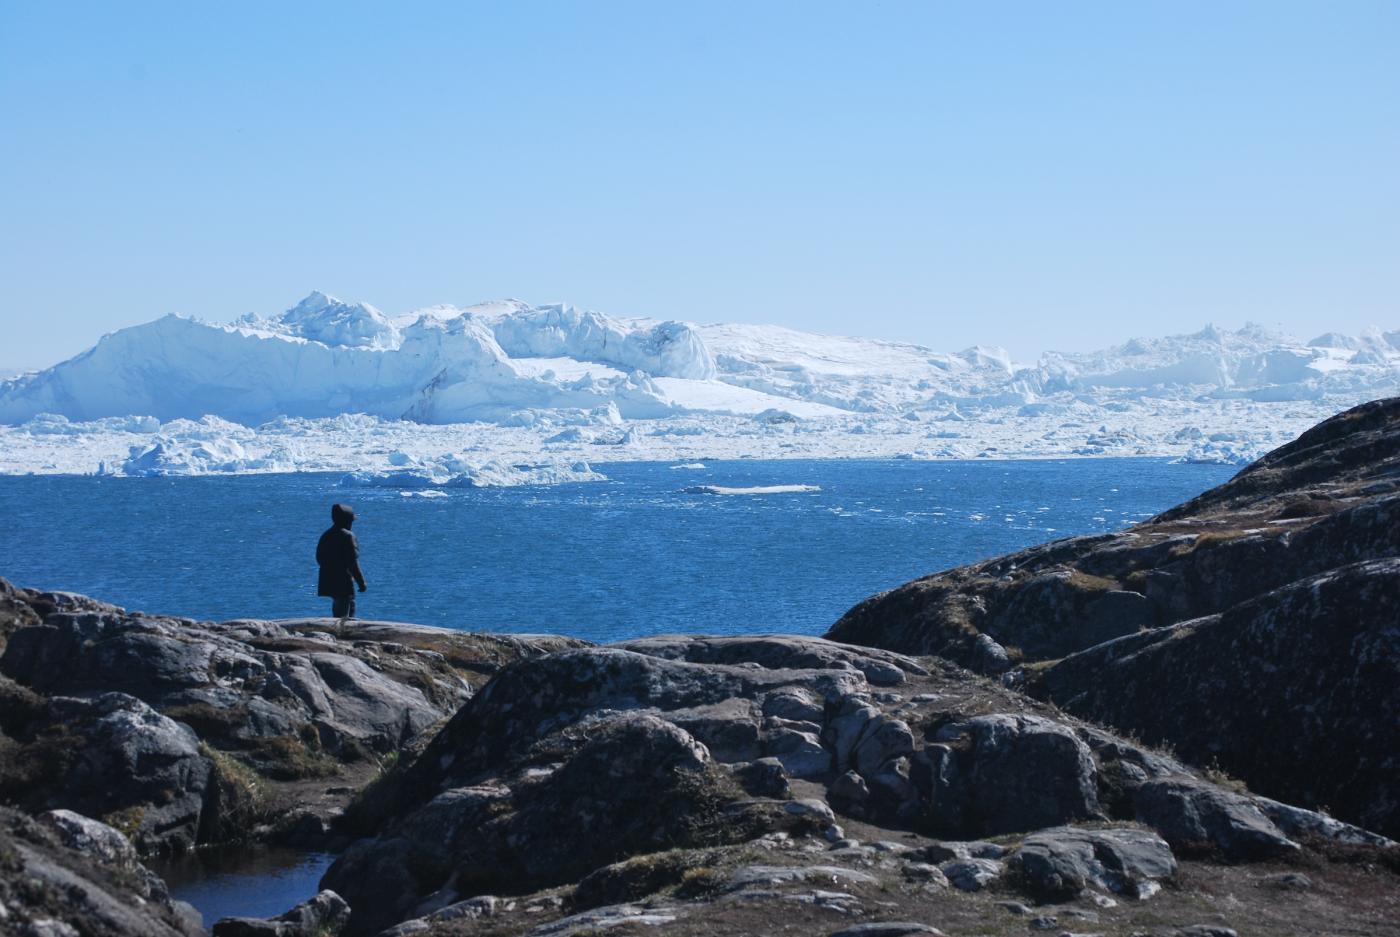 Ilulissat Icefjord into which 45 km3 of ice are calved from the Greenland icecap on a yearly basis. Photo: Claus Grue/WCC